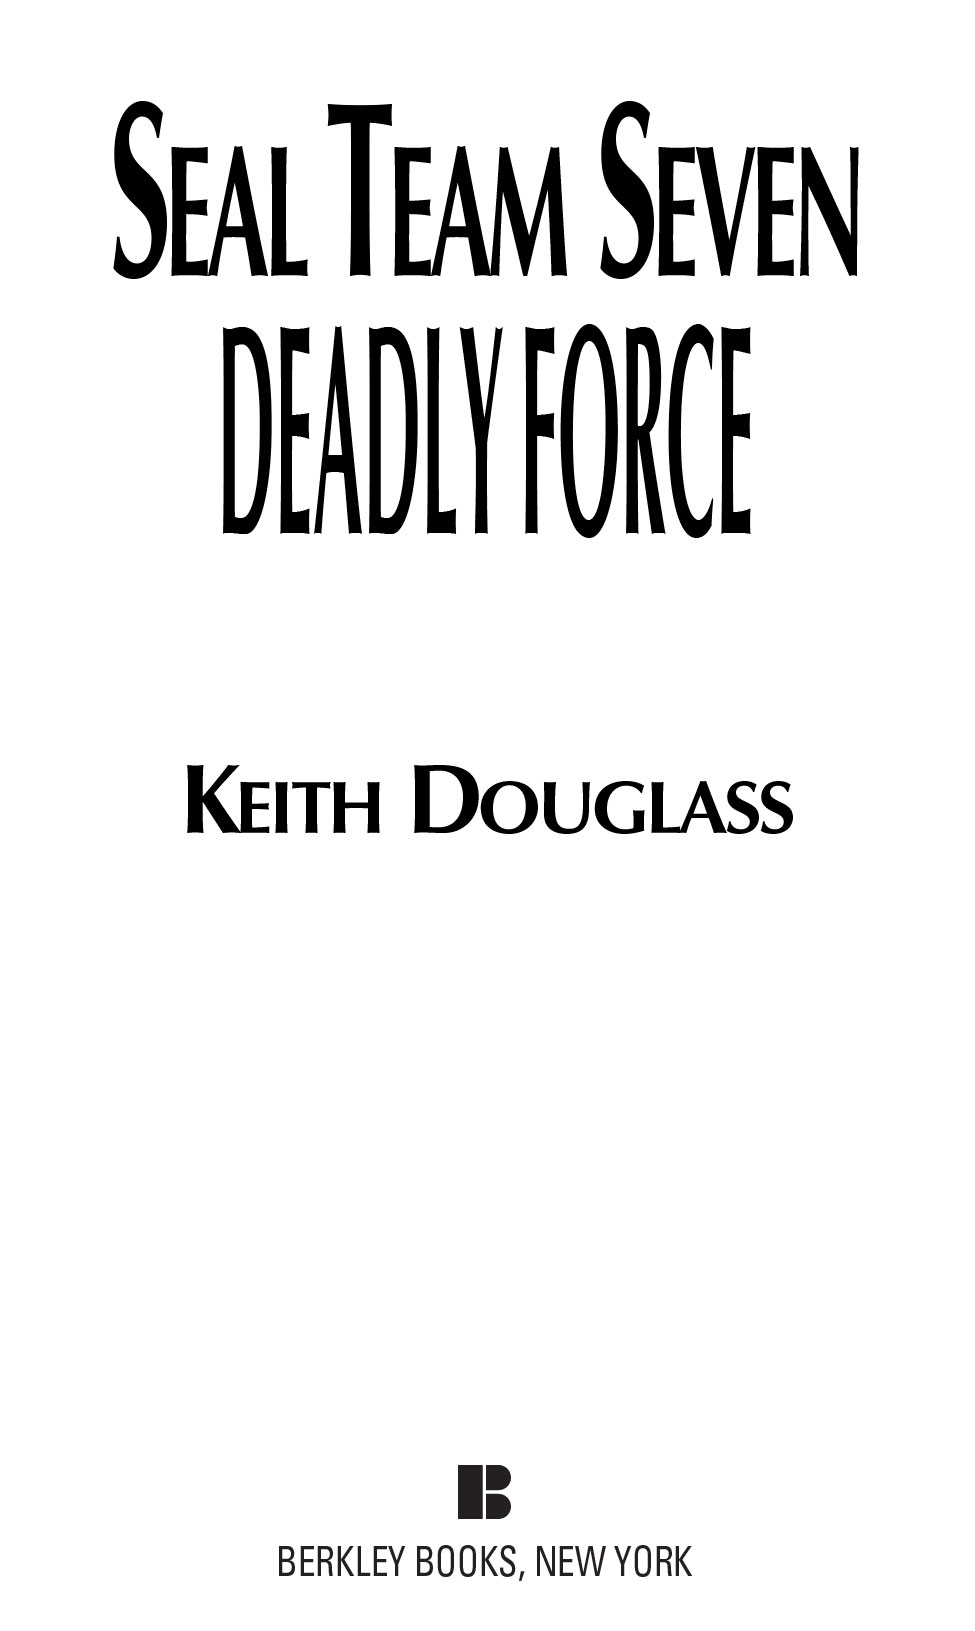 Deadly Force by Keith Douglass